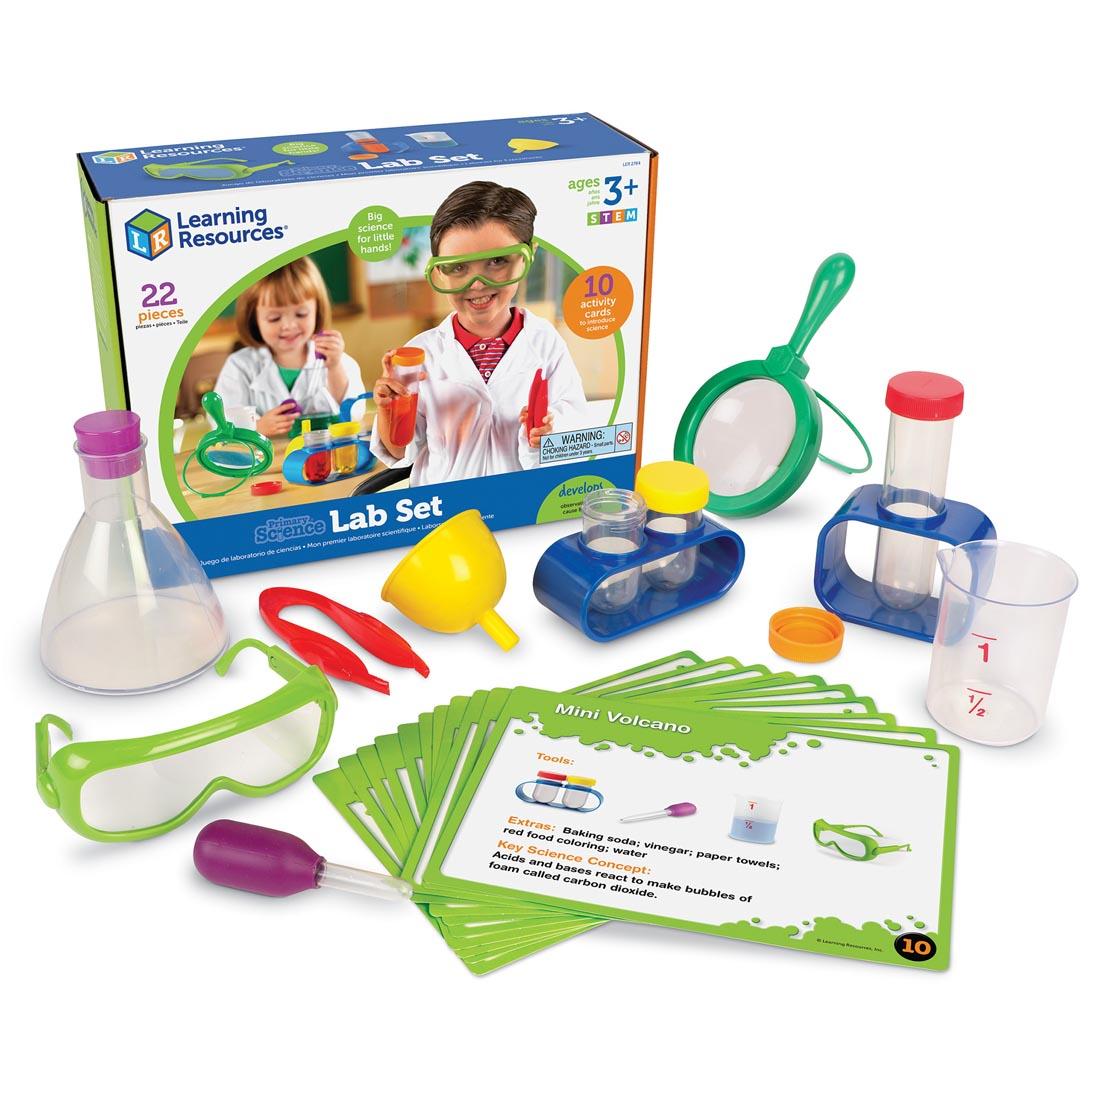 Primary Science Lab Set box by Learning Resources, with contents shown outside the box